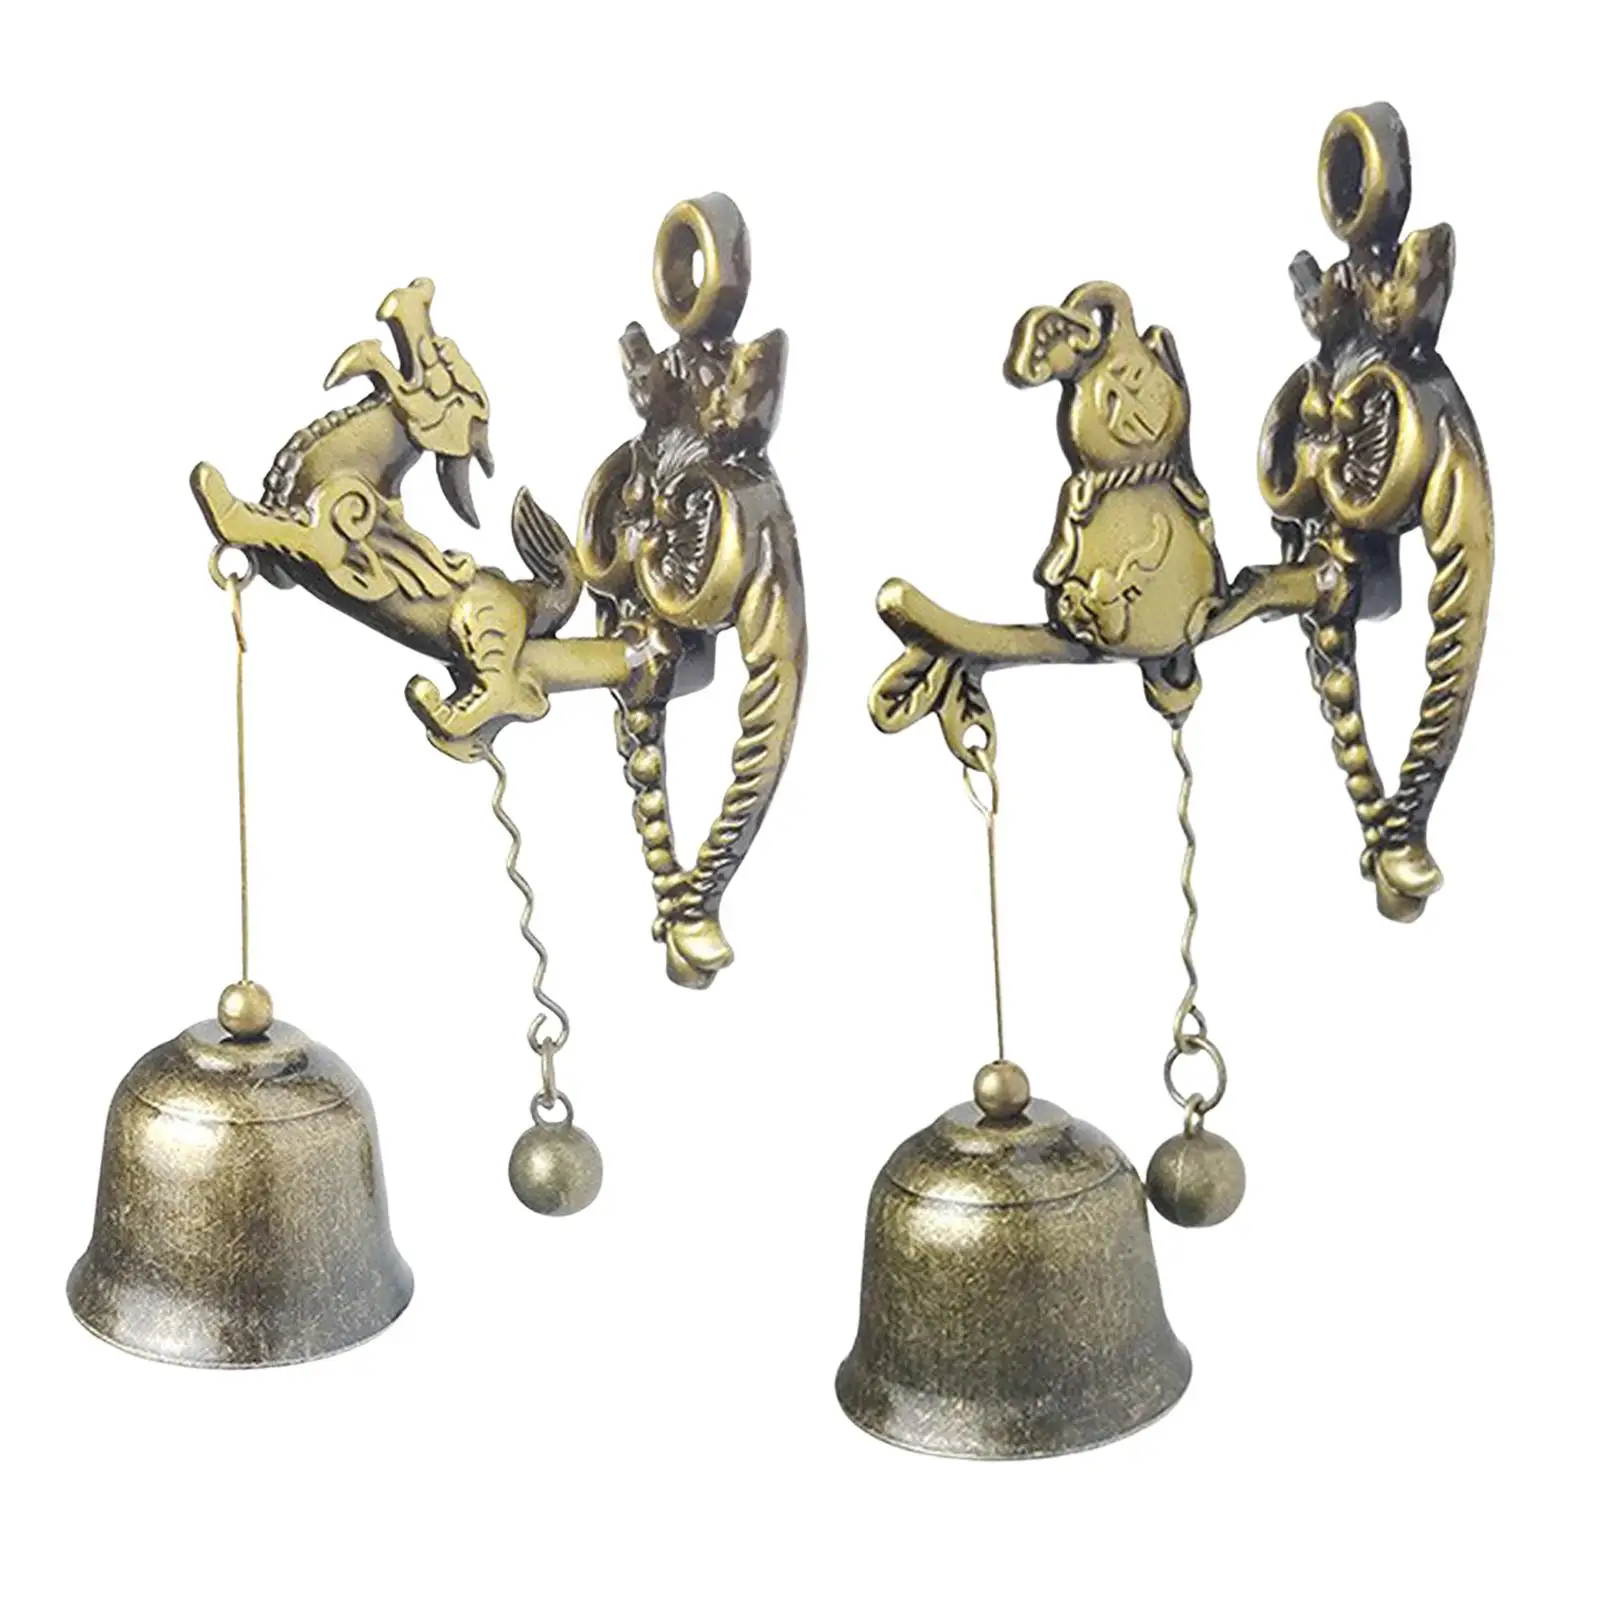 Hanging Wind Chimes Entry Door Bell Gate Bell Shop Farmhouse Decor